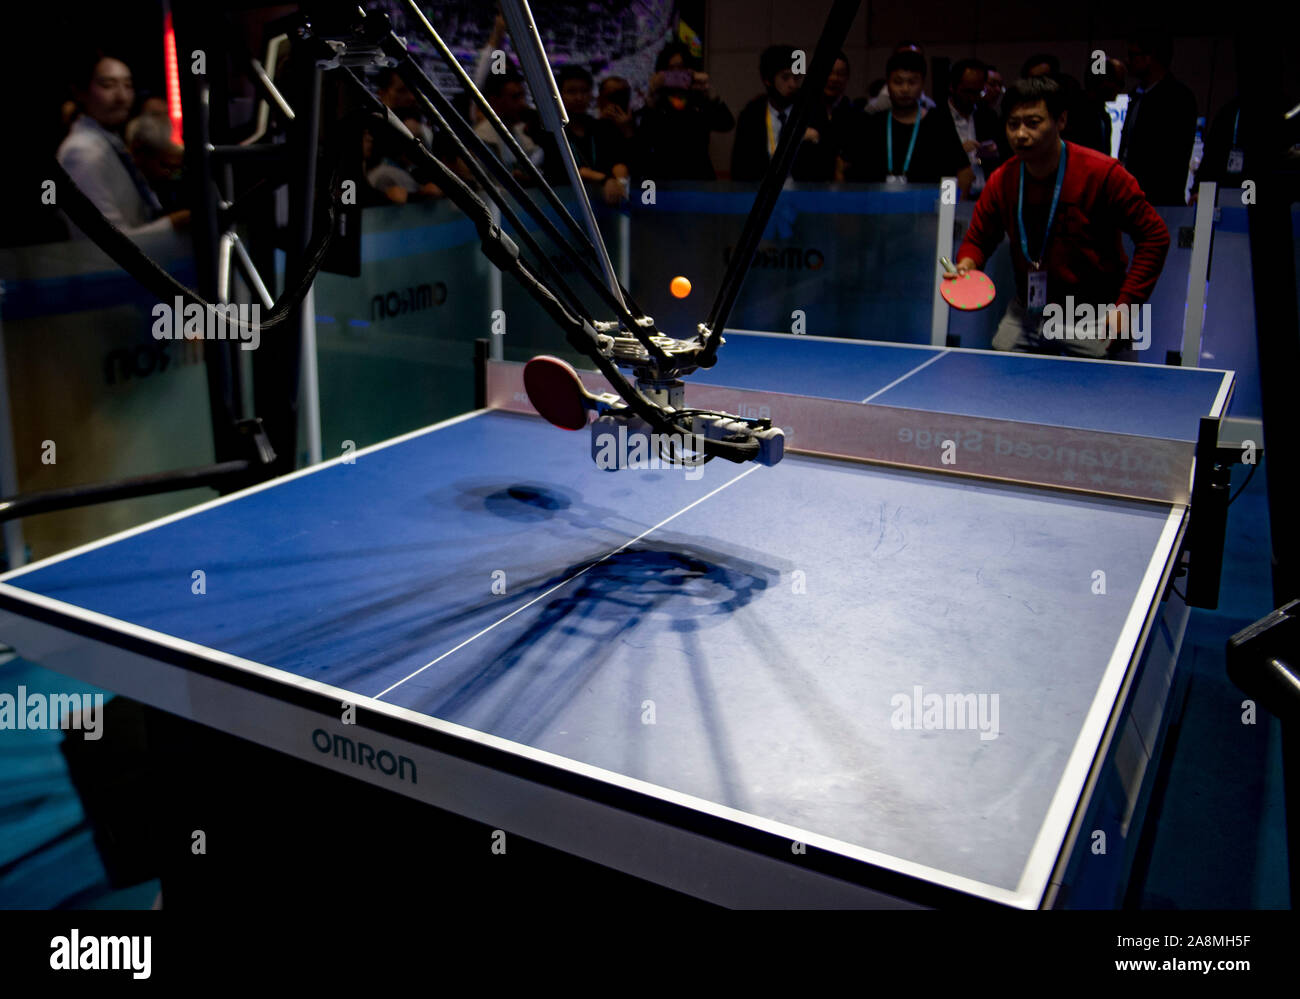 Shanghai, China. 9th Nov, 2019. A visitor plays table tennis with Omron's Forpheus during the second China International Import Expo (CIIE) in Shanghai, east China, Nov. 9, 2019. The robot displayed in the CIIE is the 5th generation of Forpheus. Credit: Purbu Zhaxi/Xinhua/Alamy Live News Stock Photo